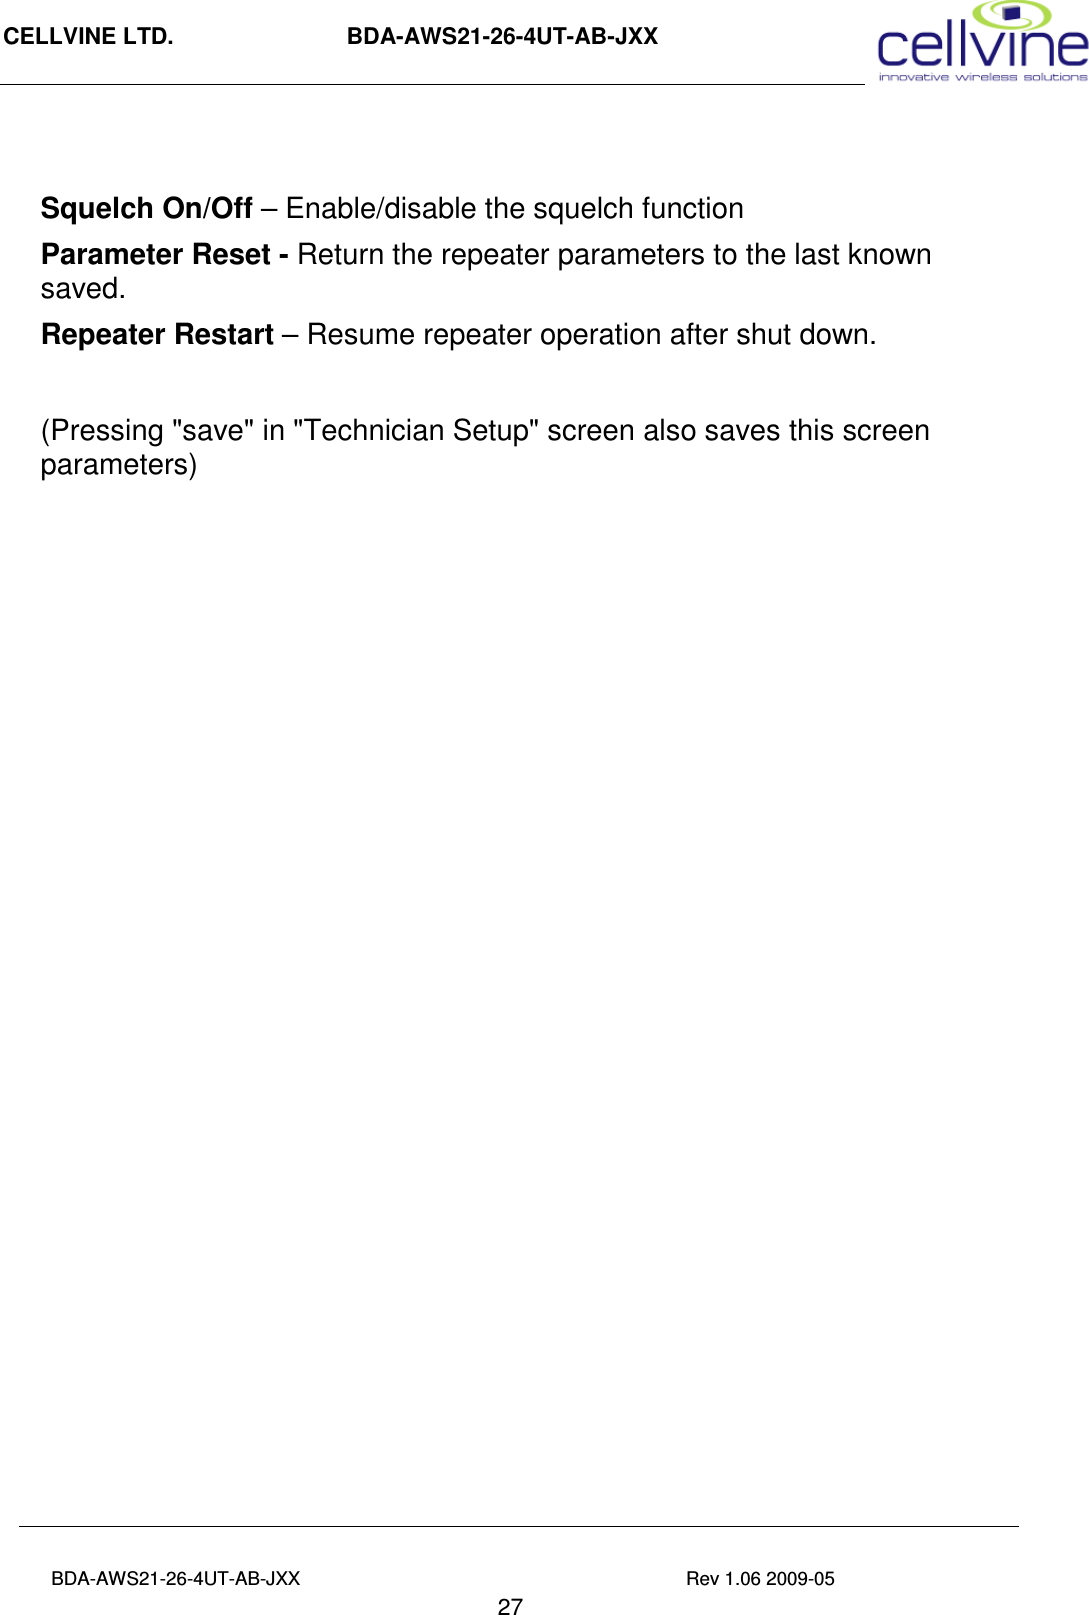 CELLVINE LTD.                      BDA-AWS21-26-4UT-AB-JXX                                                 BDA-AWS21-26-4UT-AB-JXX                                                                          Rev 1.06 2009-05                                       27  Squelch On/Off – Enable/disable the squelch function Parameter Reset - Return the repeater parameters to the last known saved. Repeater Restart – Resume repeater operation after shut down.  (Pressing &quot;save&quot; in &quot;Technician Setup&quot; screen also saves this screen parameters) 